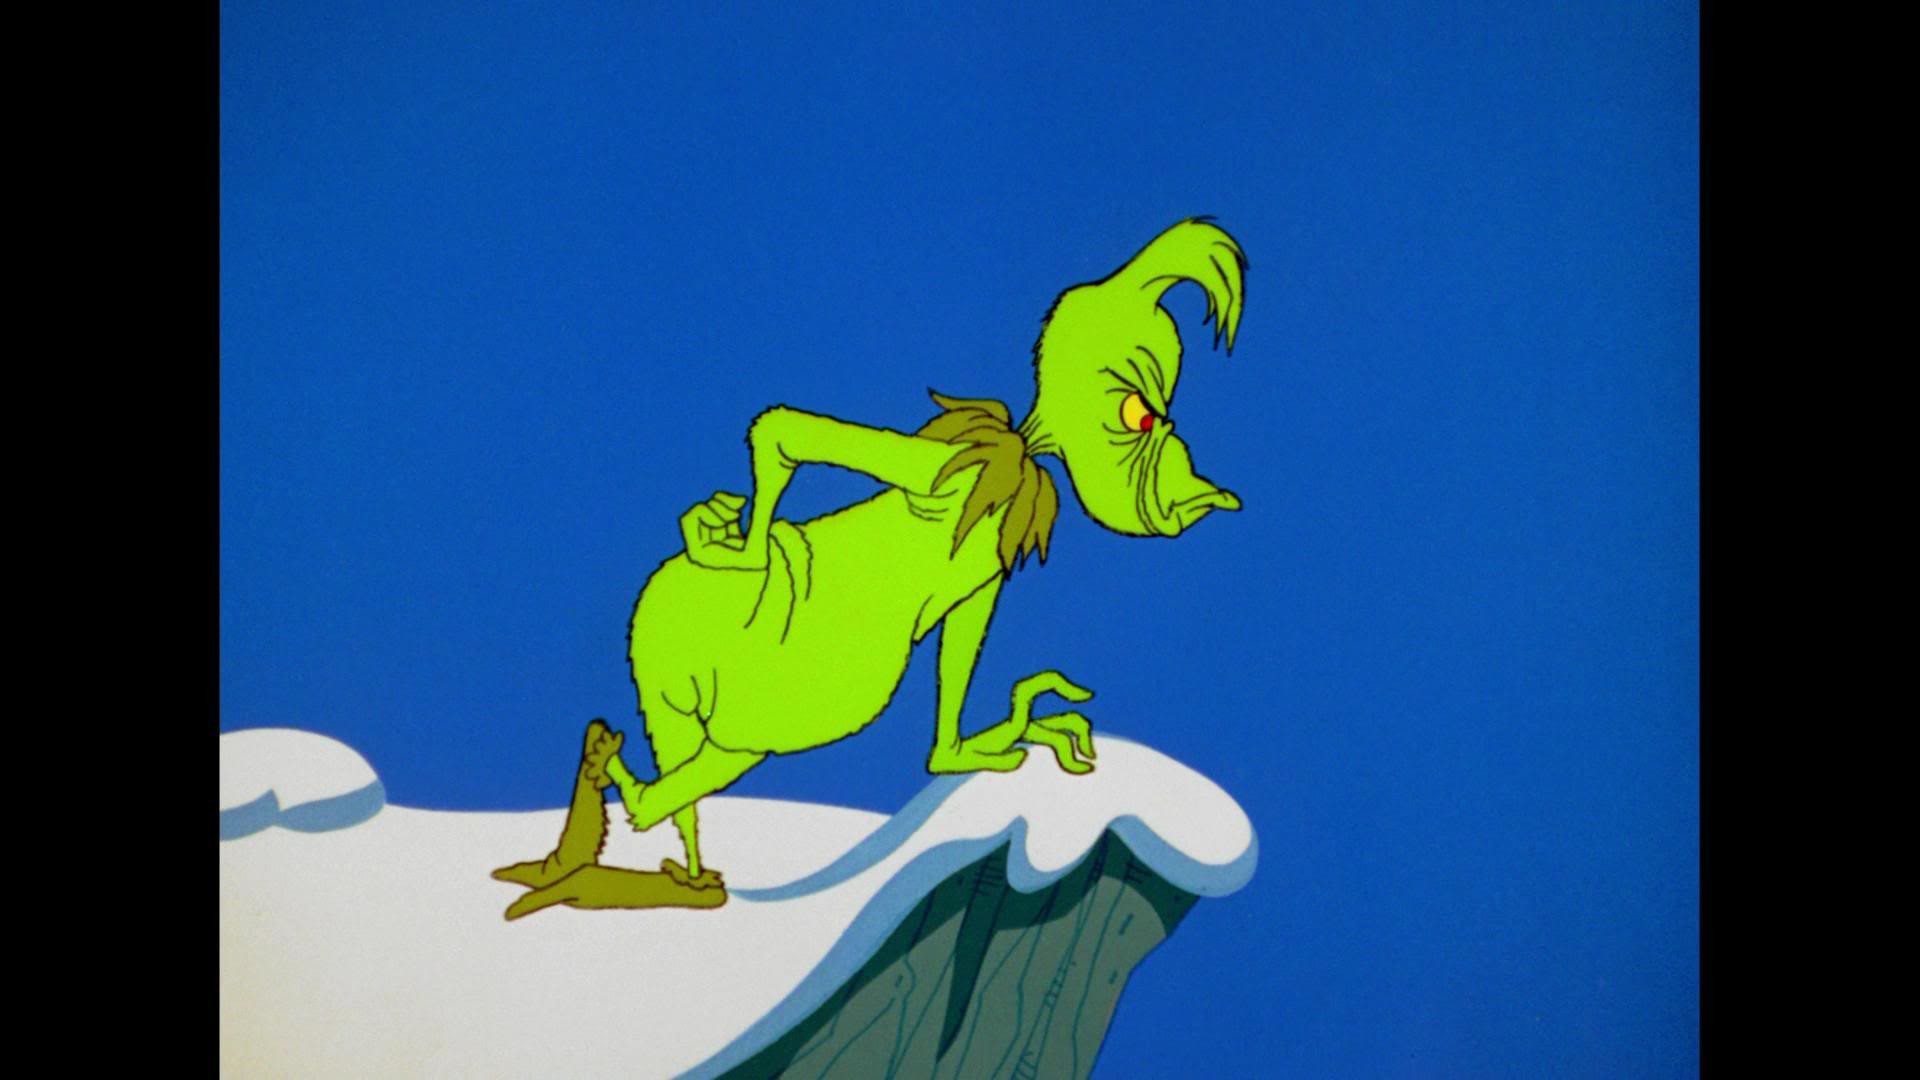 1920x1080 How the Grinch Stole Christmas Movie HD Wallpapers 1920Ã1080